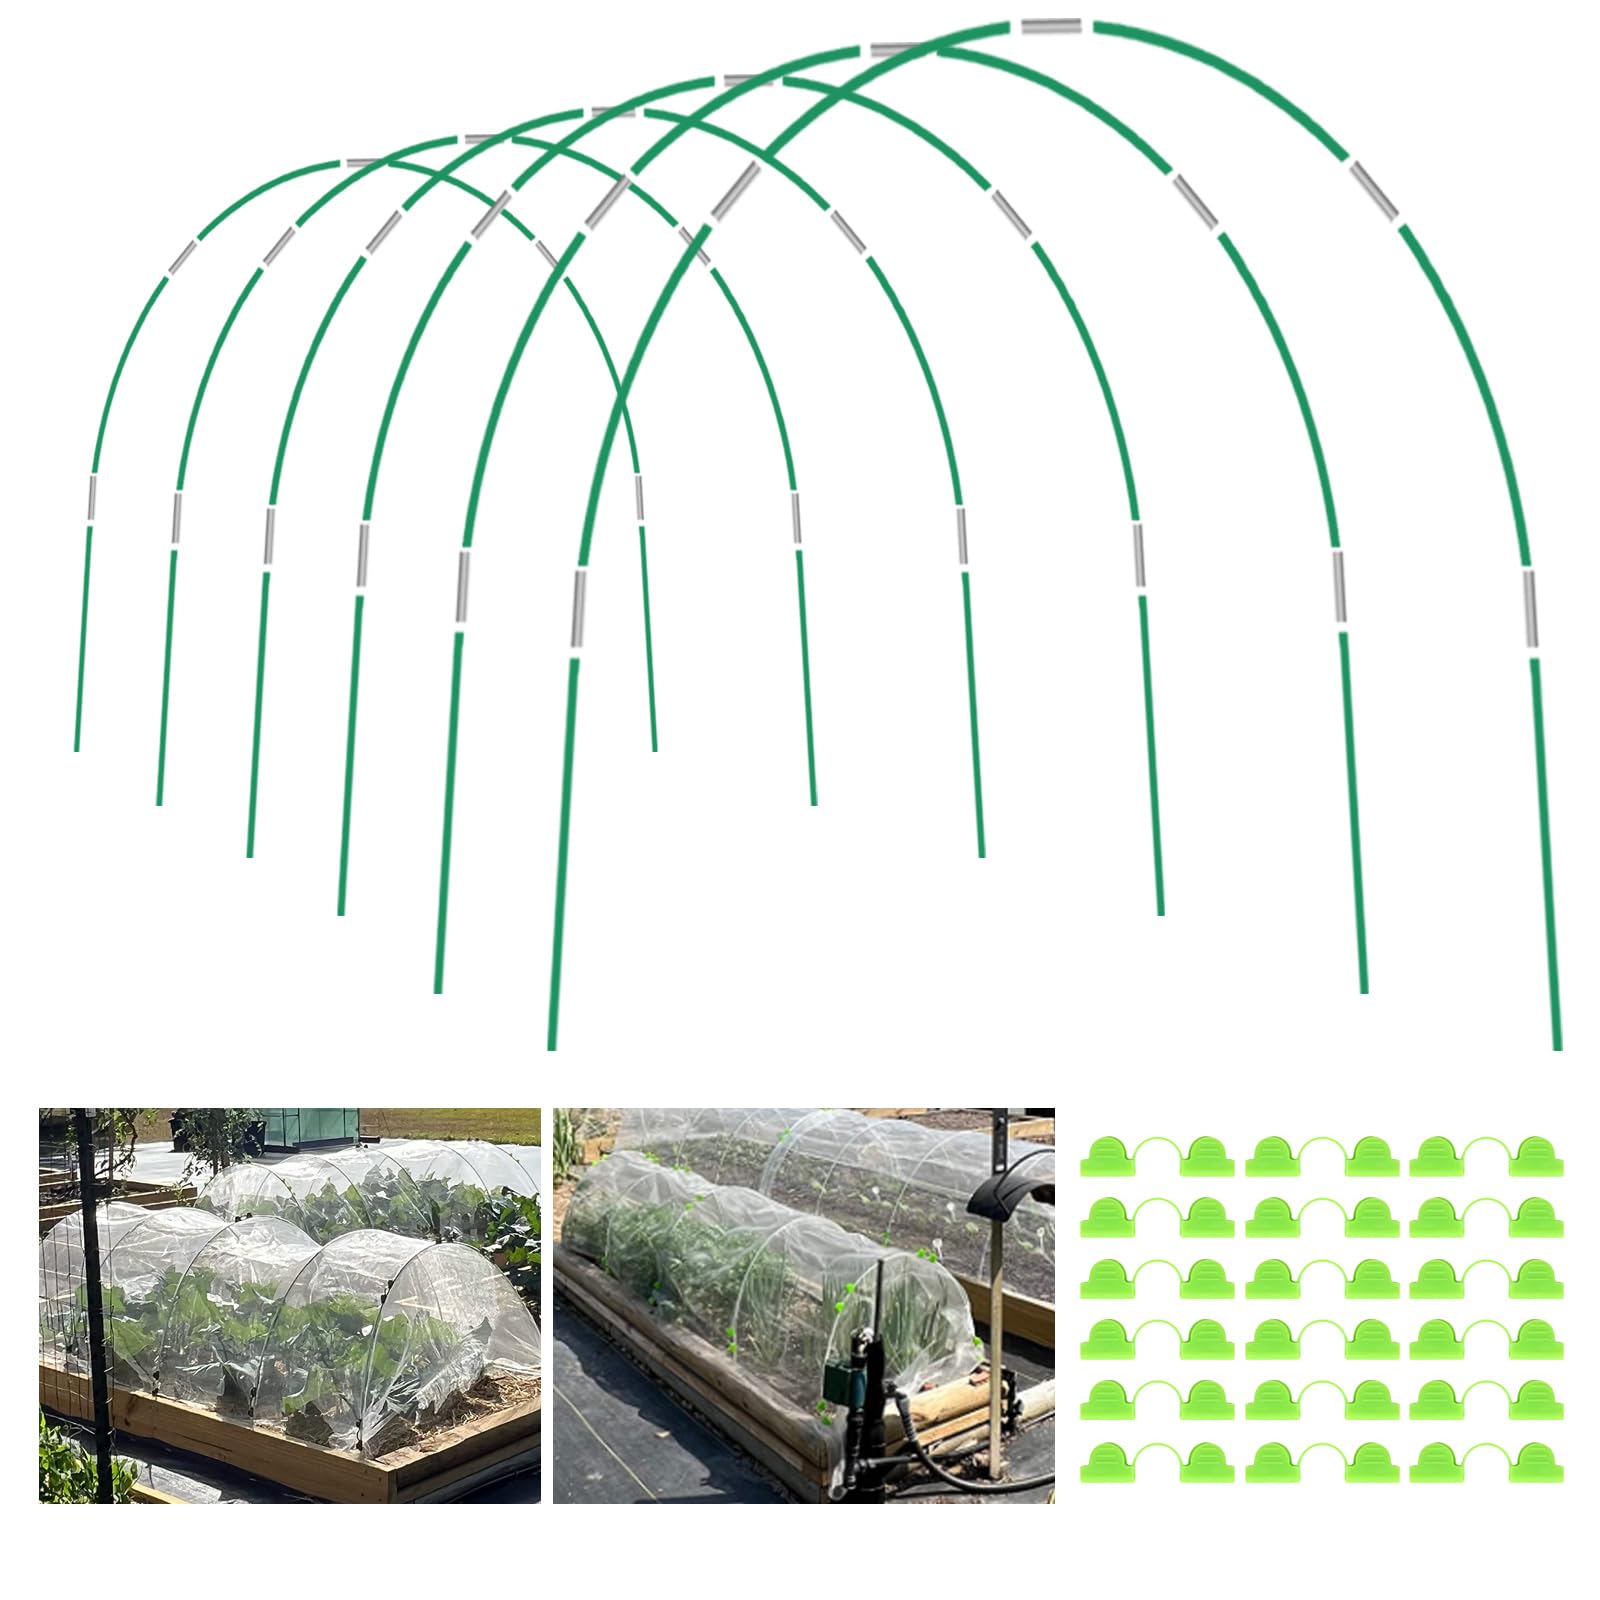 JCKHXG Garden Hoops for Raised Bed, 6 Sets of 8FT Long Greenhouse Hoops Grow Tunnel, Rust-Free Fiberglass Support Hoops Frame for Netting, DIY Plant Support Garden Stakes for Row Cover, 36pcs